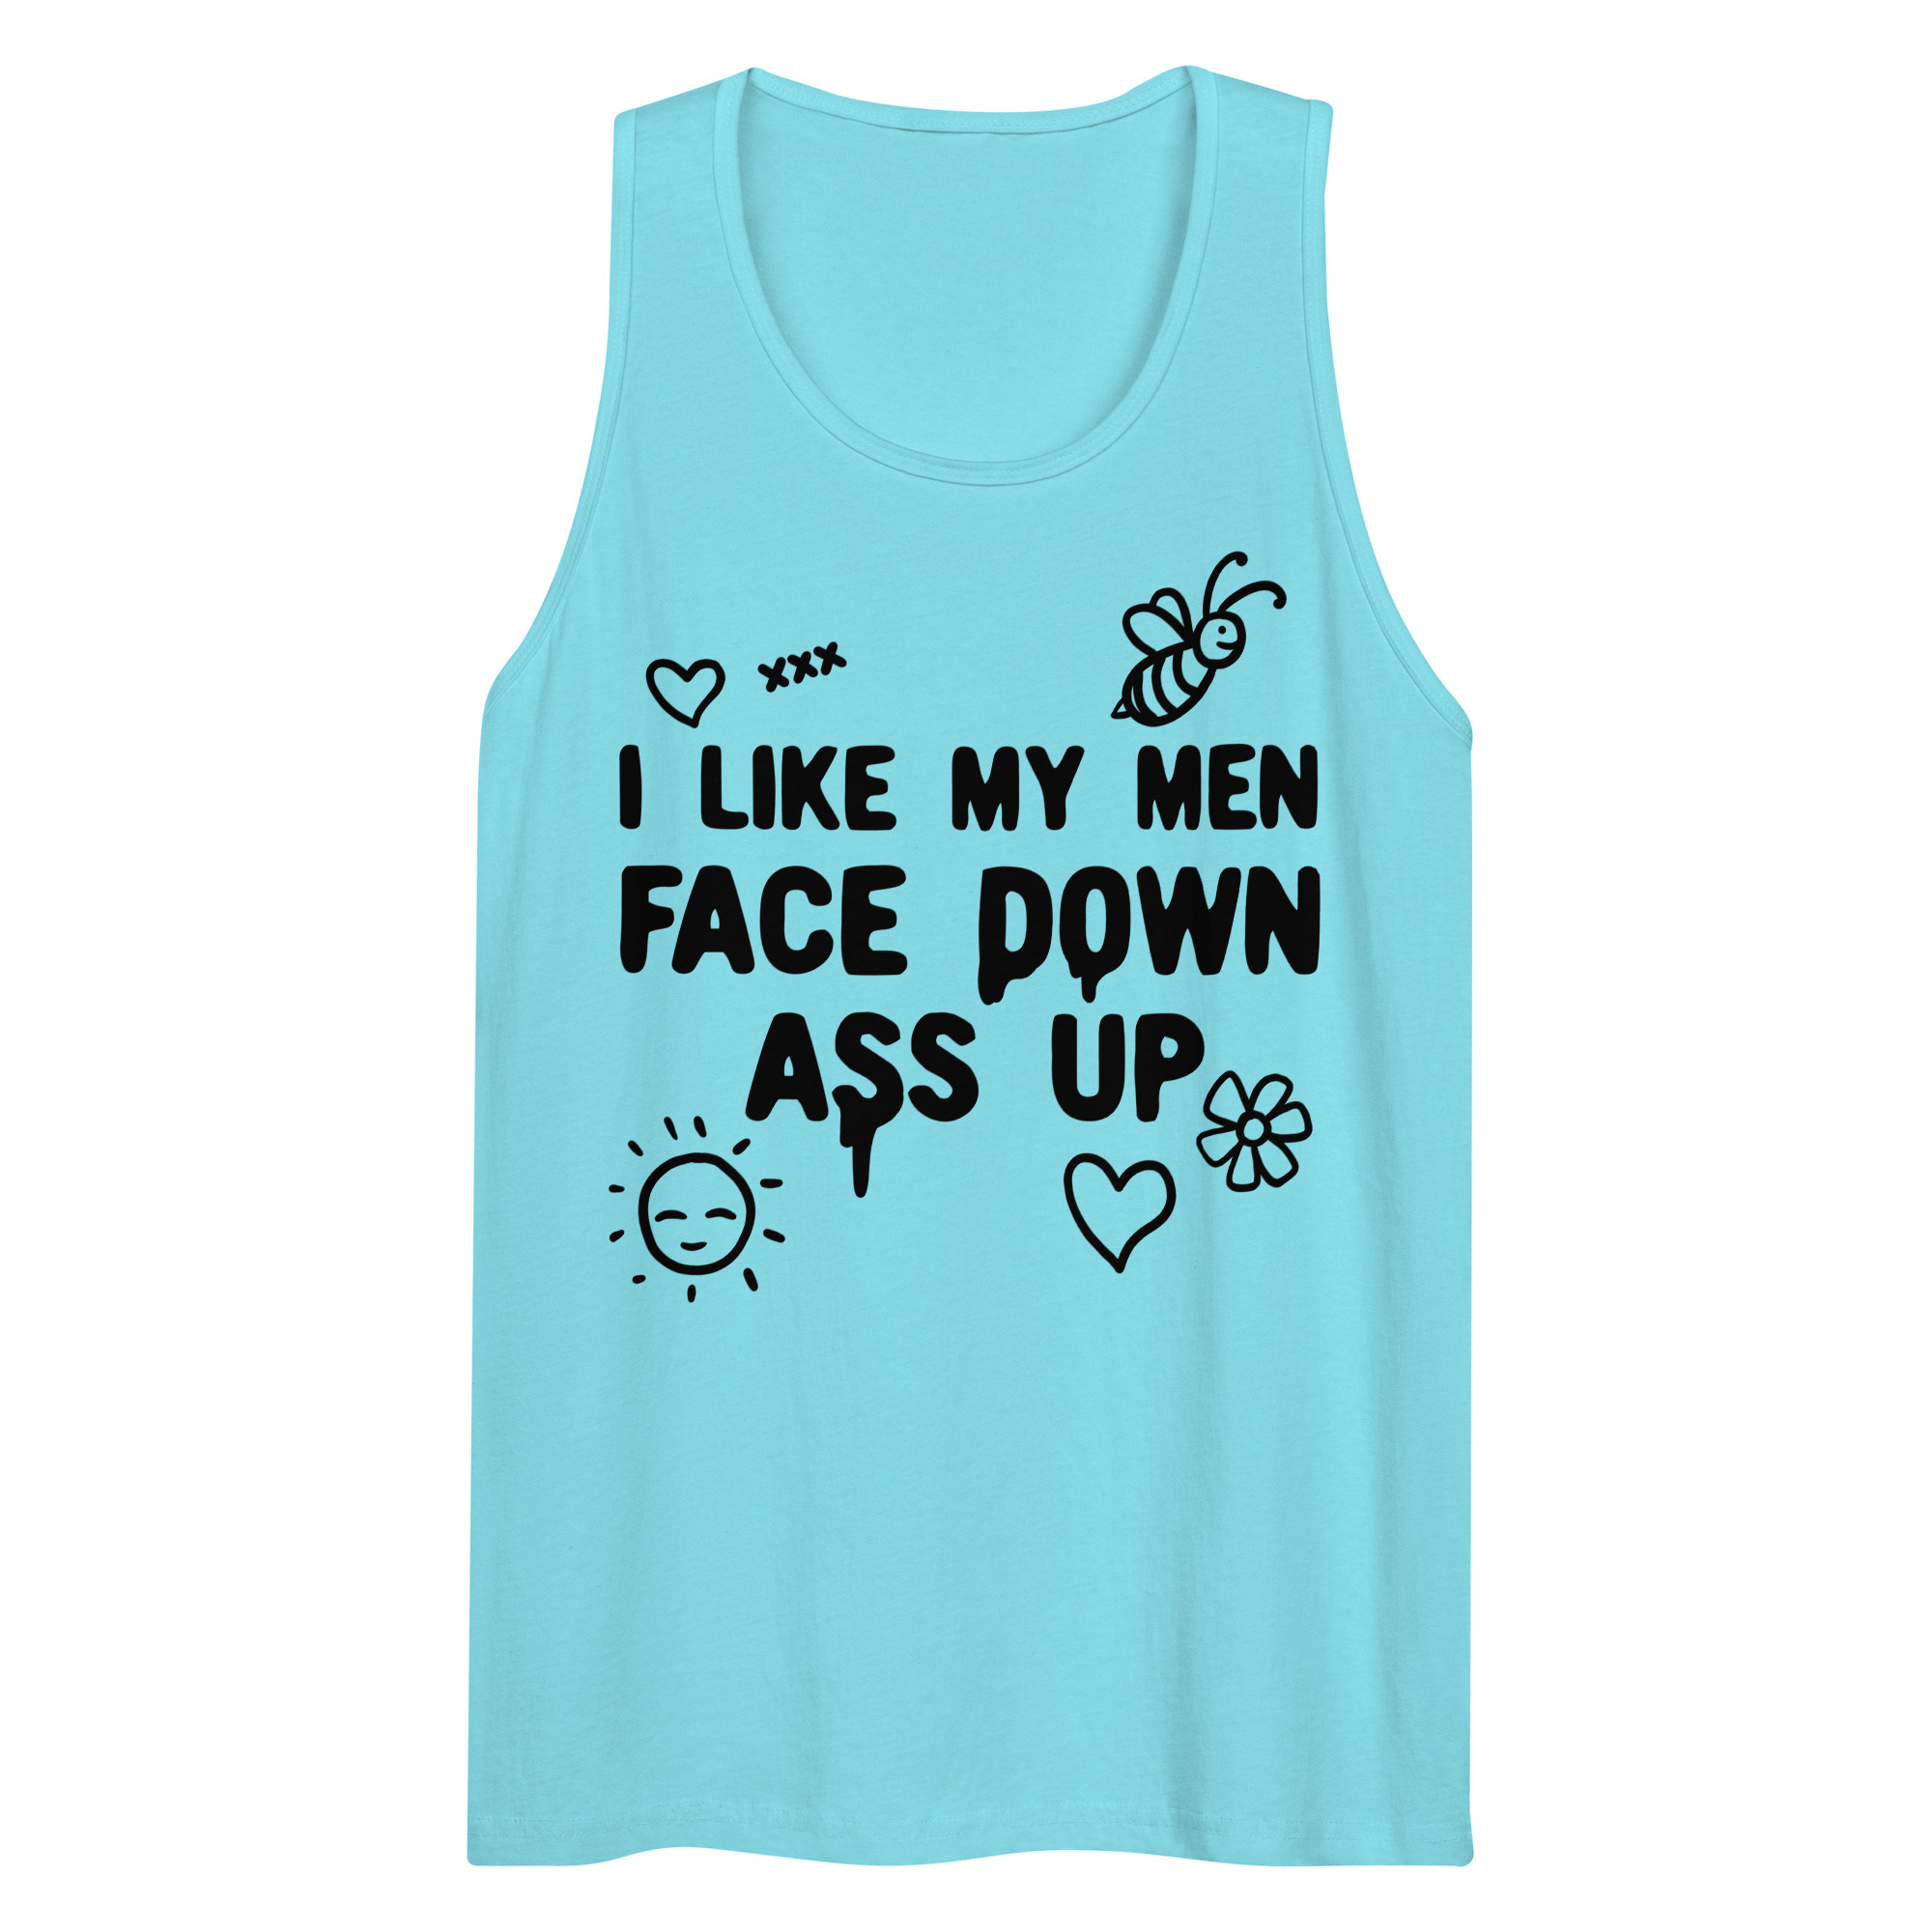 Featured image for “I Like my Men Face Down Ass Up - silly -  Men’s premium tank top”